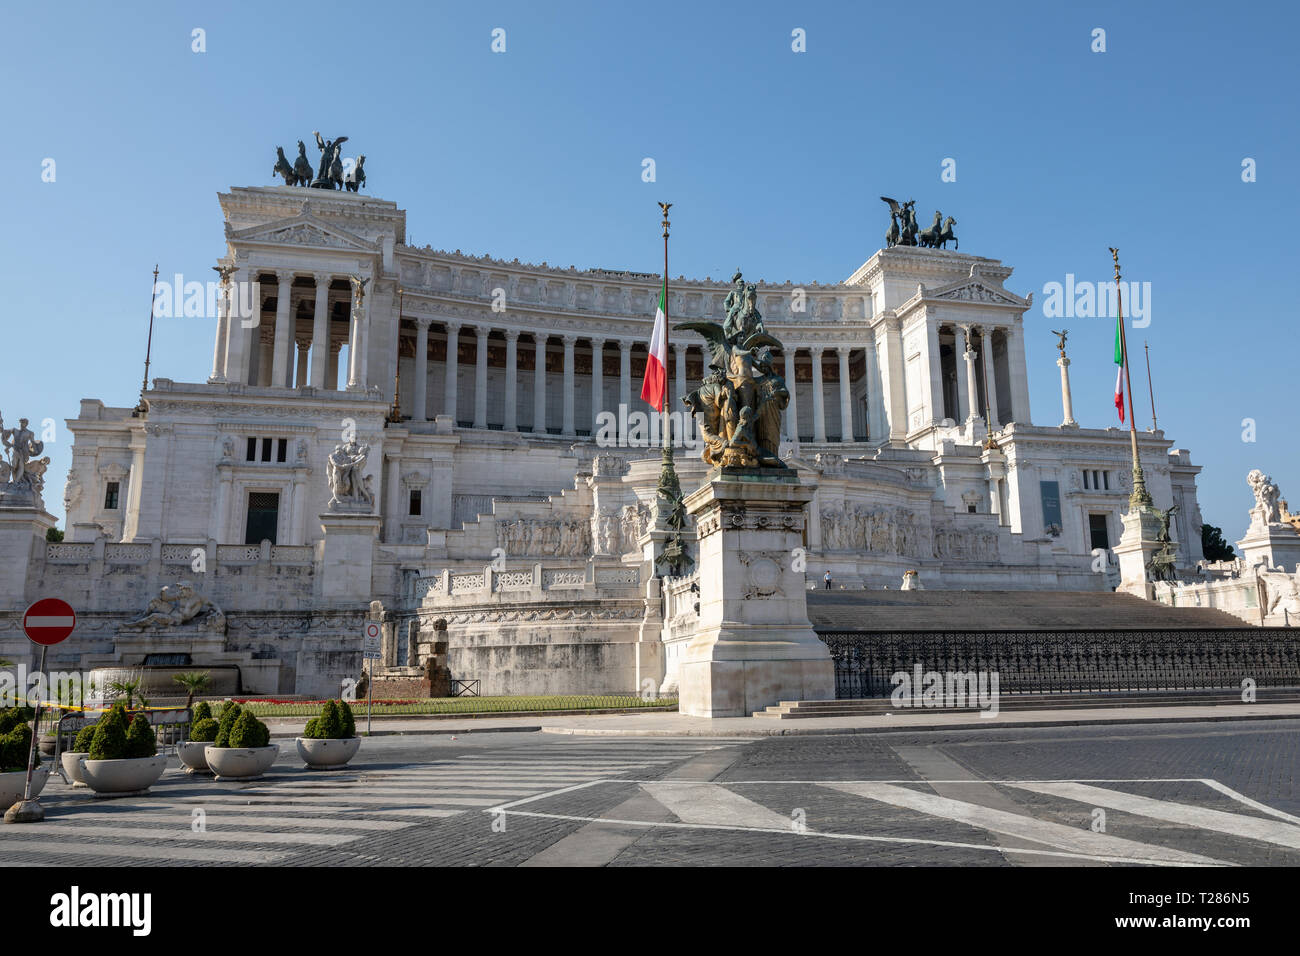 Rome, Italy - June 20, 2018: Panoramic front view of museum the Vittorio Emanuele II Monument also known as the Vittoriano or Altare della Patria at P Stock Photo